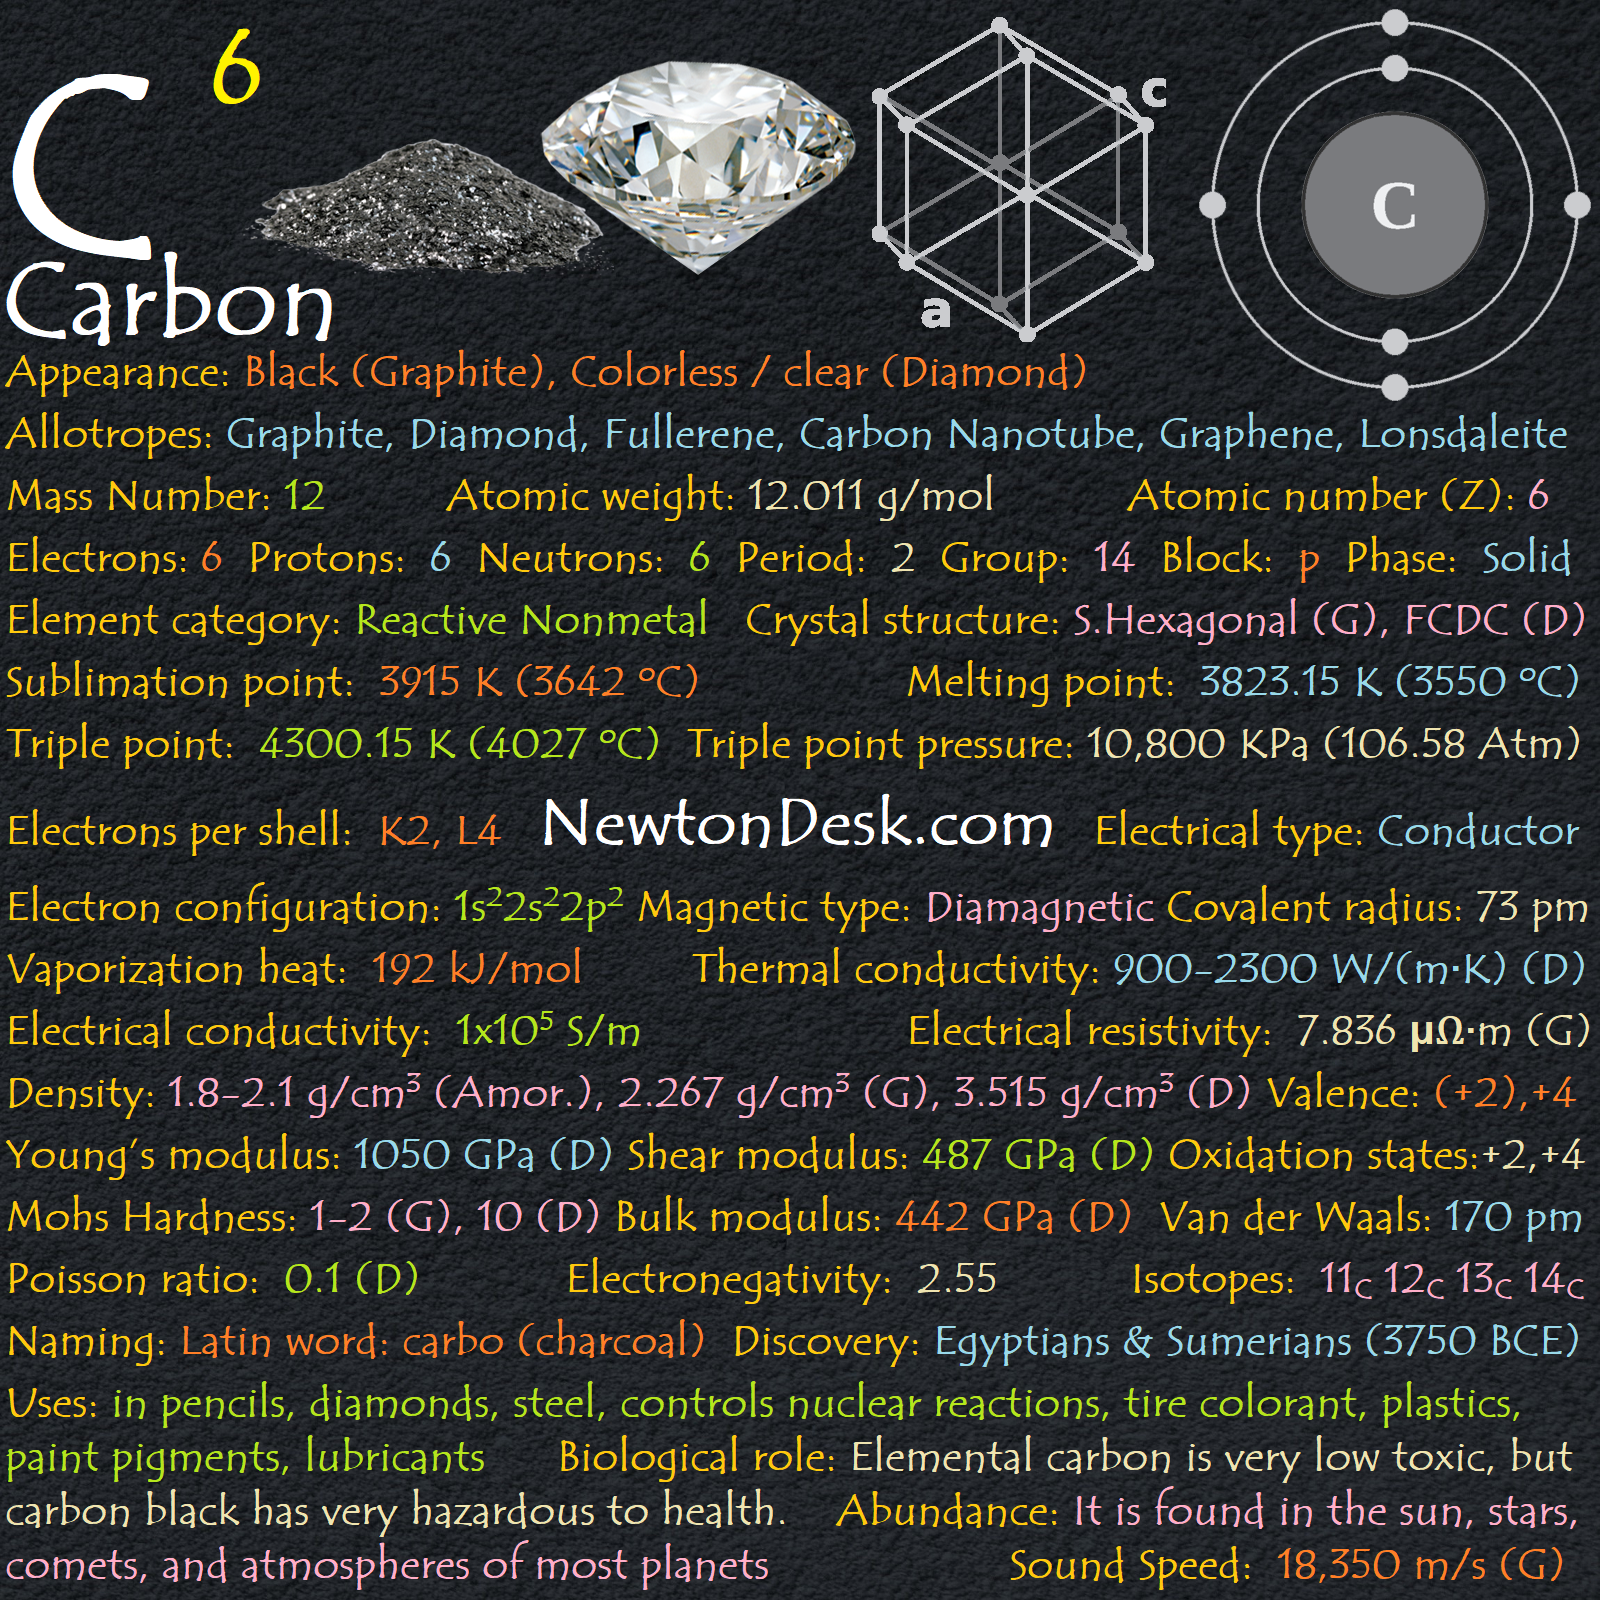 Carbon: Facts about an element that is a key ingredient for life